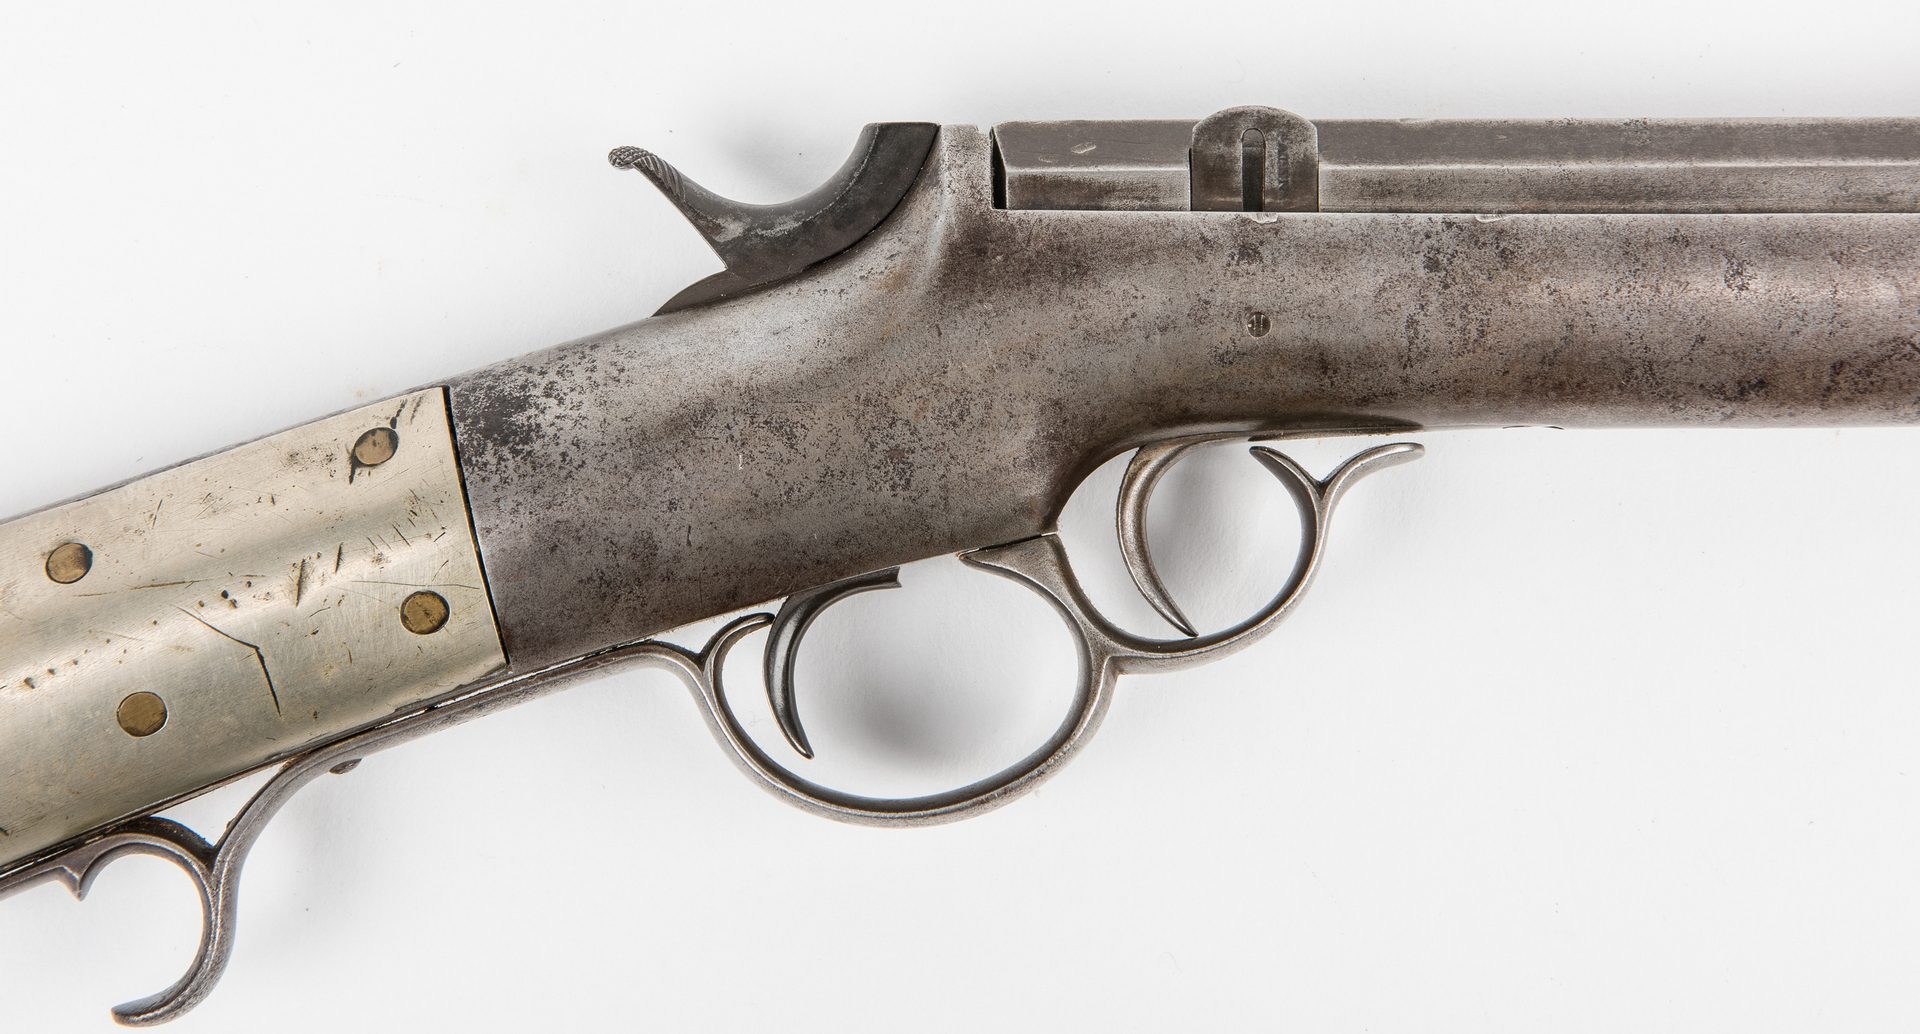 Lot 320: Kittredge Marked Wesson First Model Carbine, .44 rimfire cal.